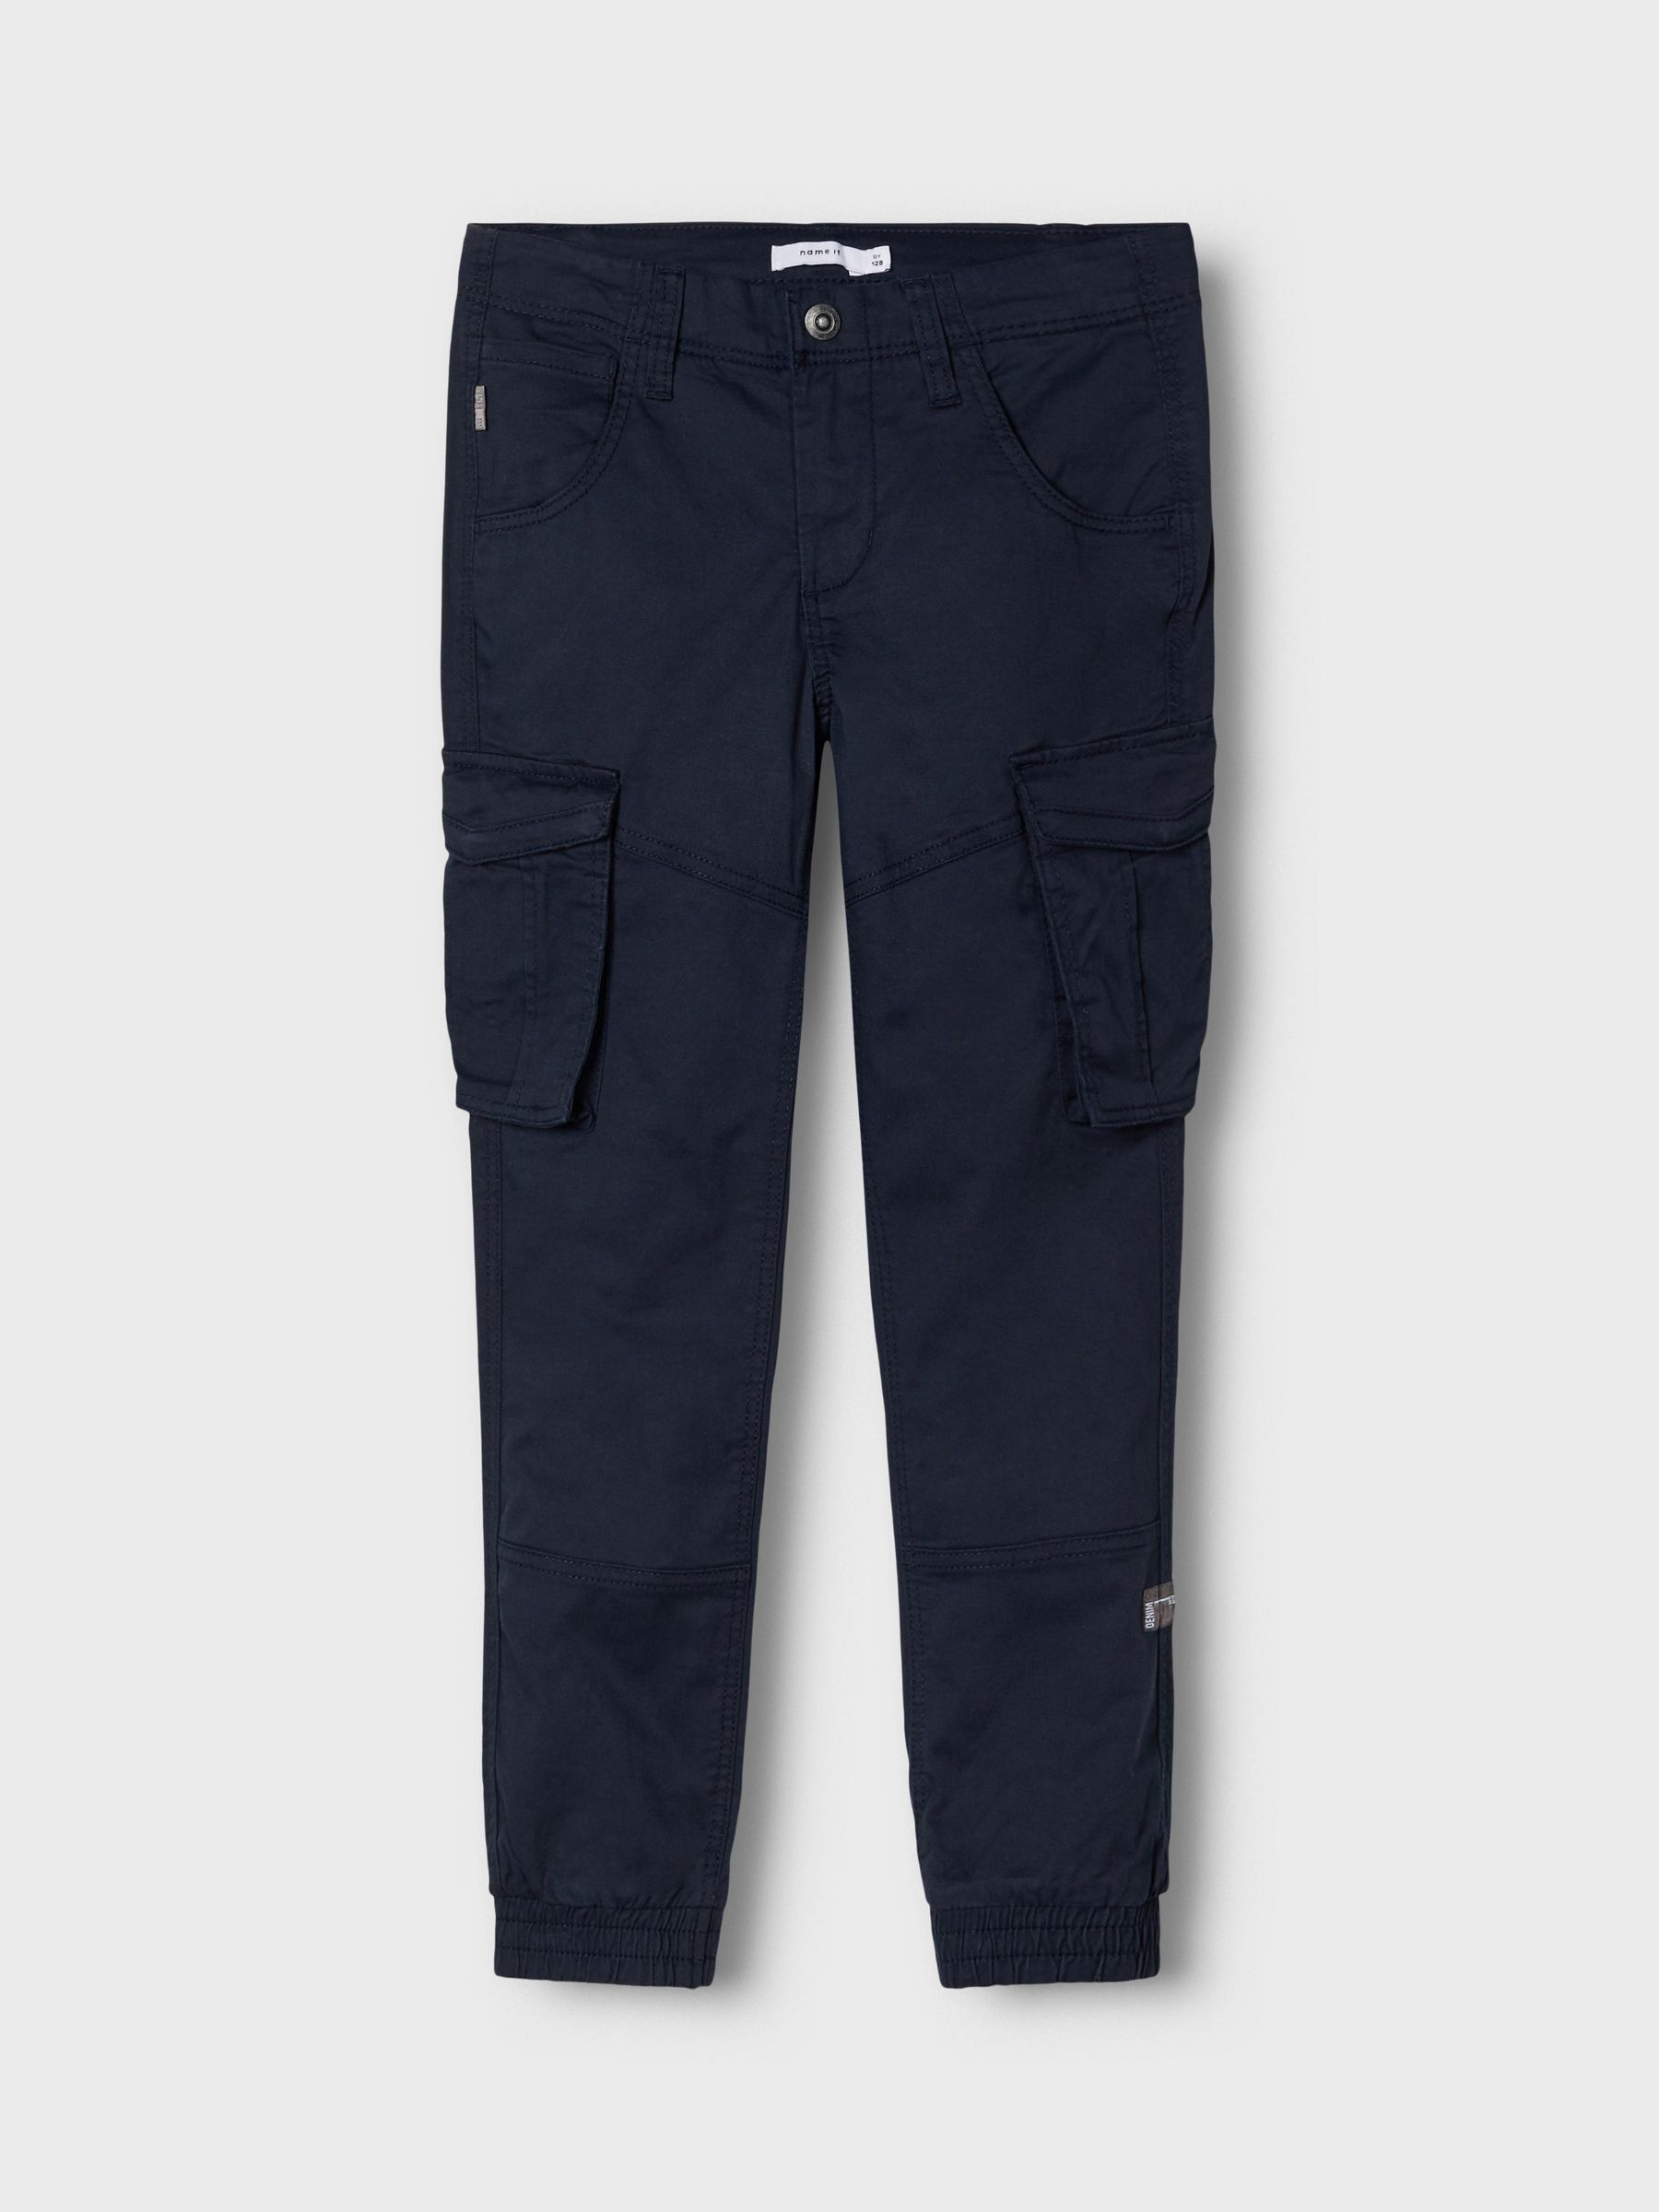 Buy Core Cargo Fleece Jogger Men's Jeans & Pants from Buyers Picks. Find  Buyers Picks fashion & more at DrJays.com